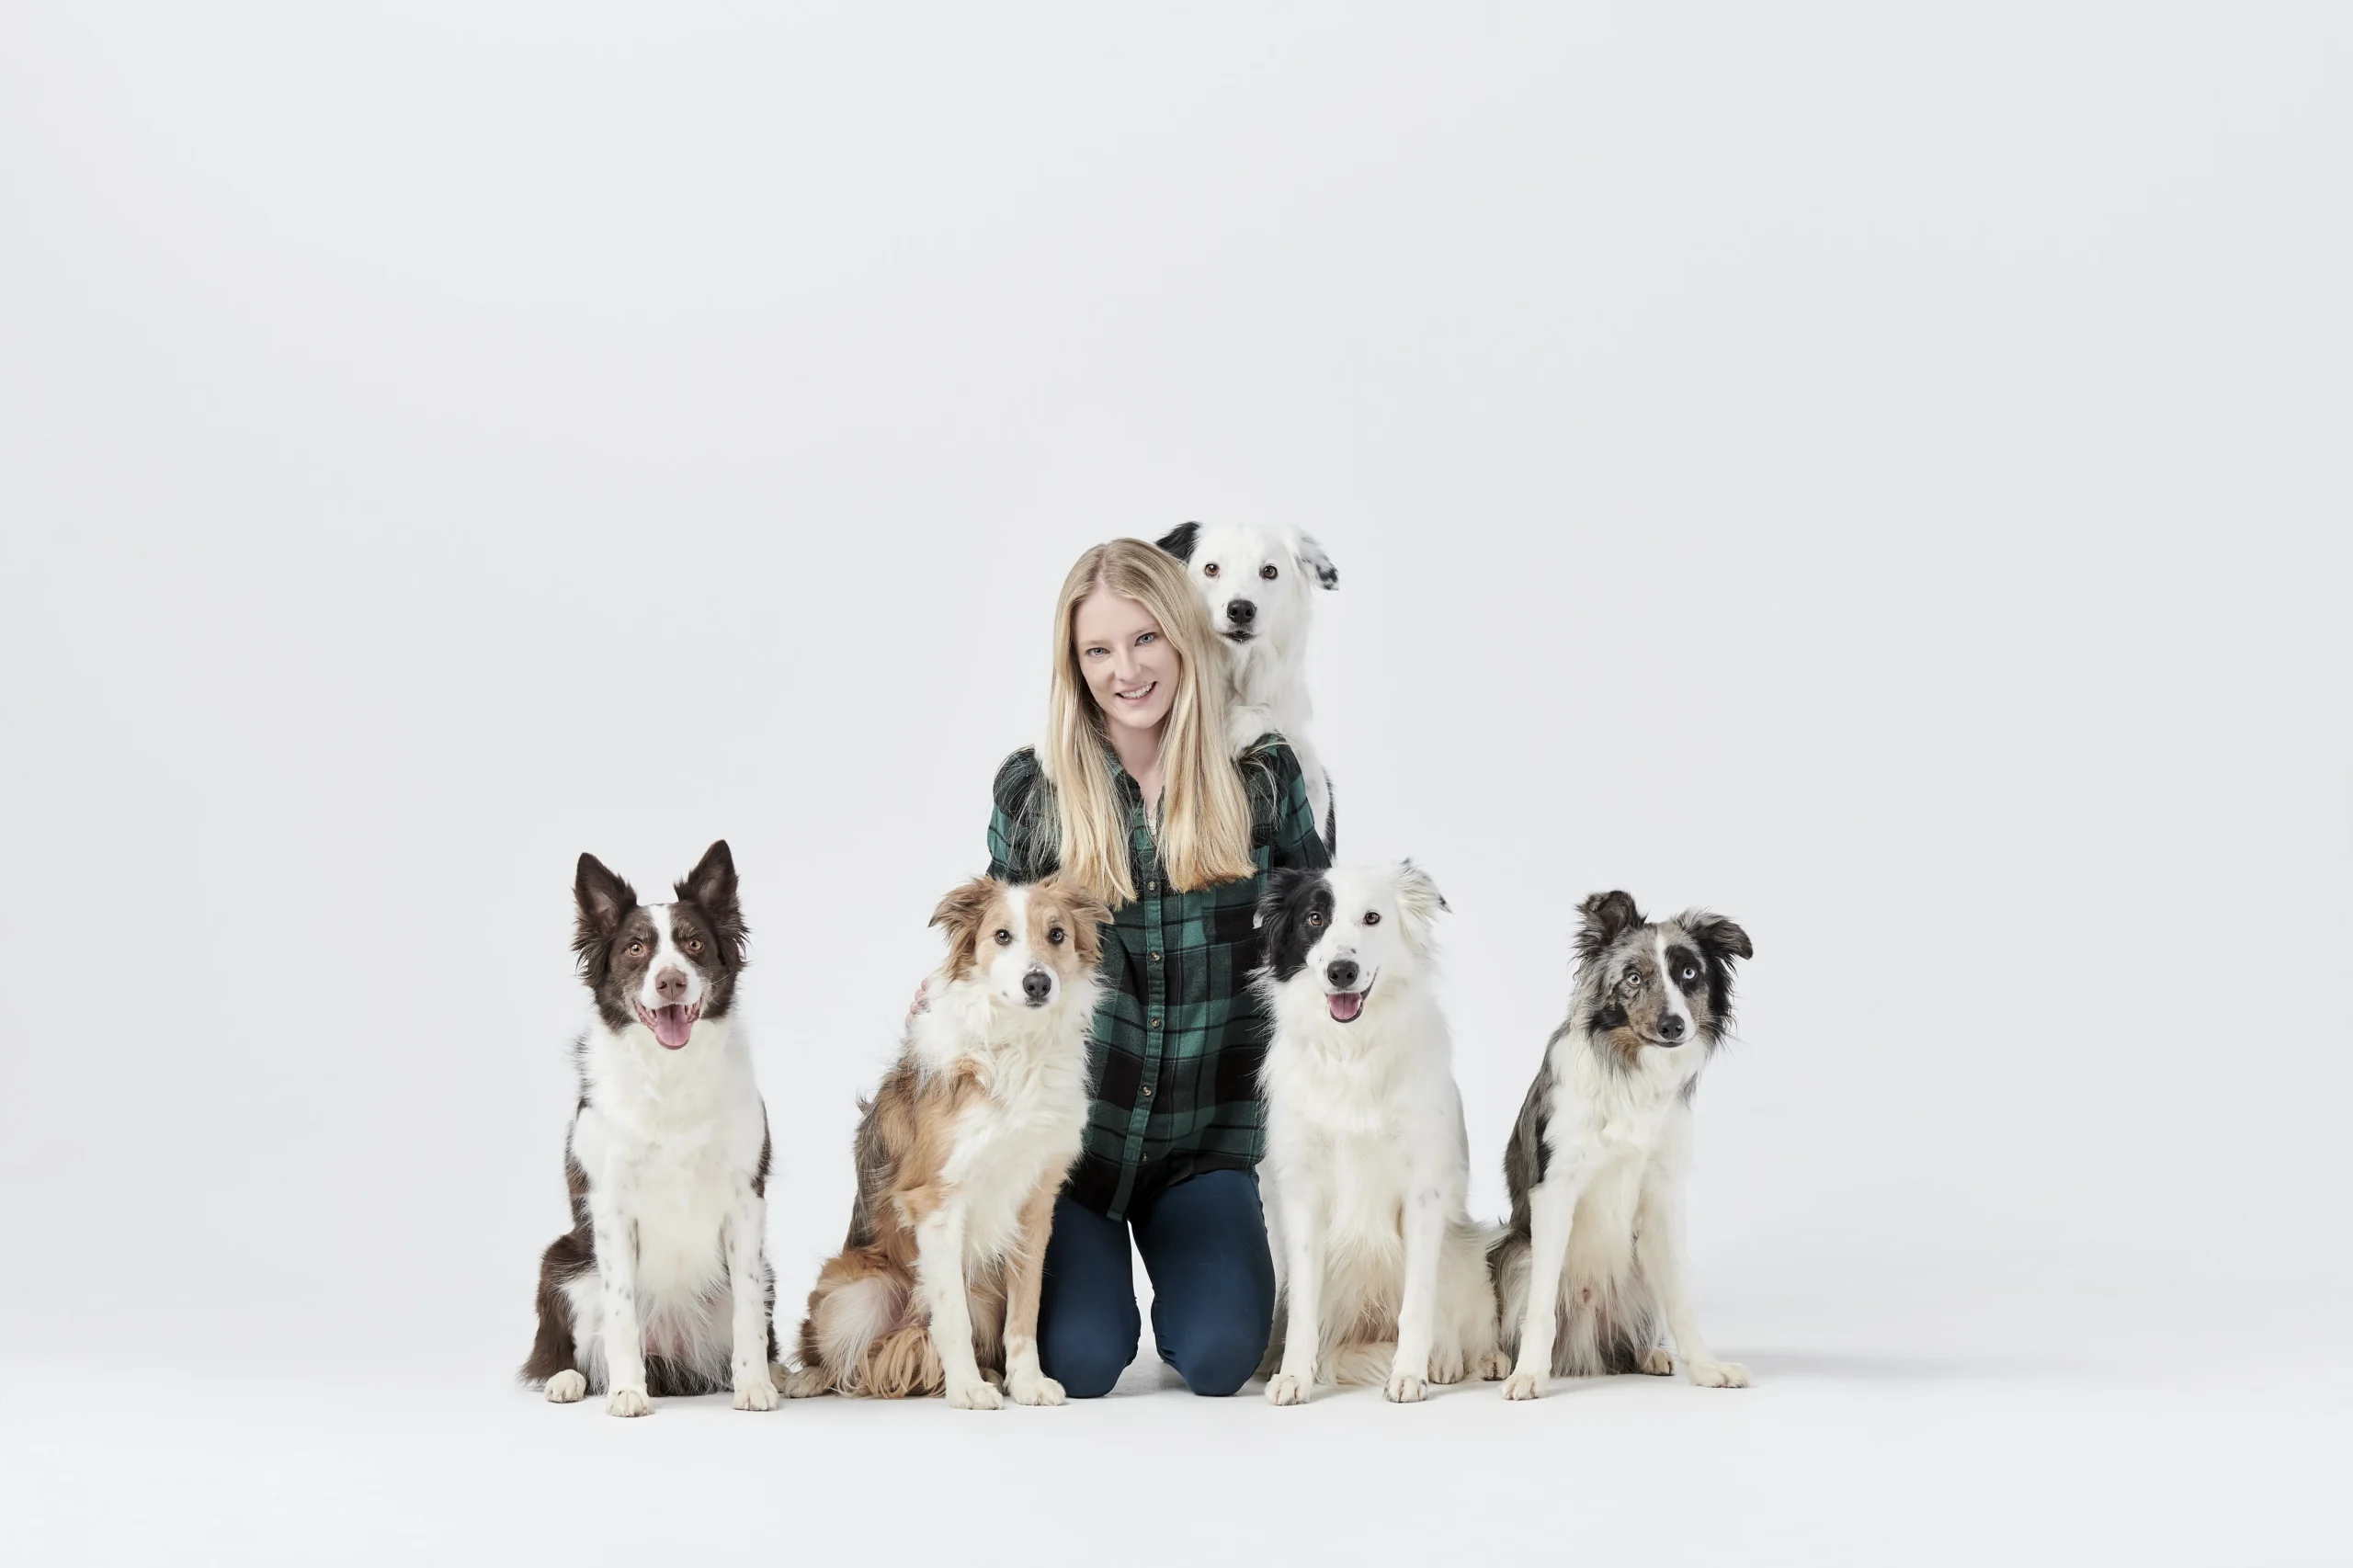 Sara Carson and her dogs